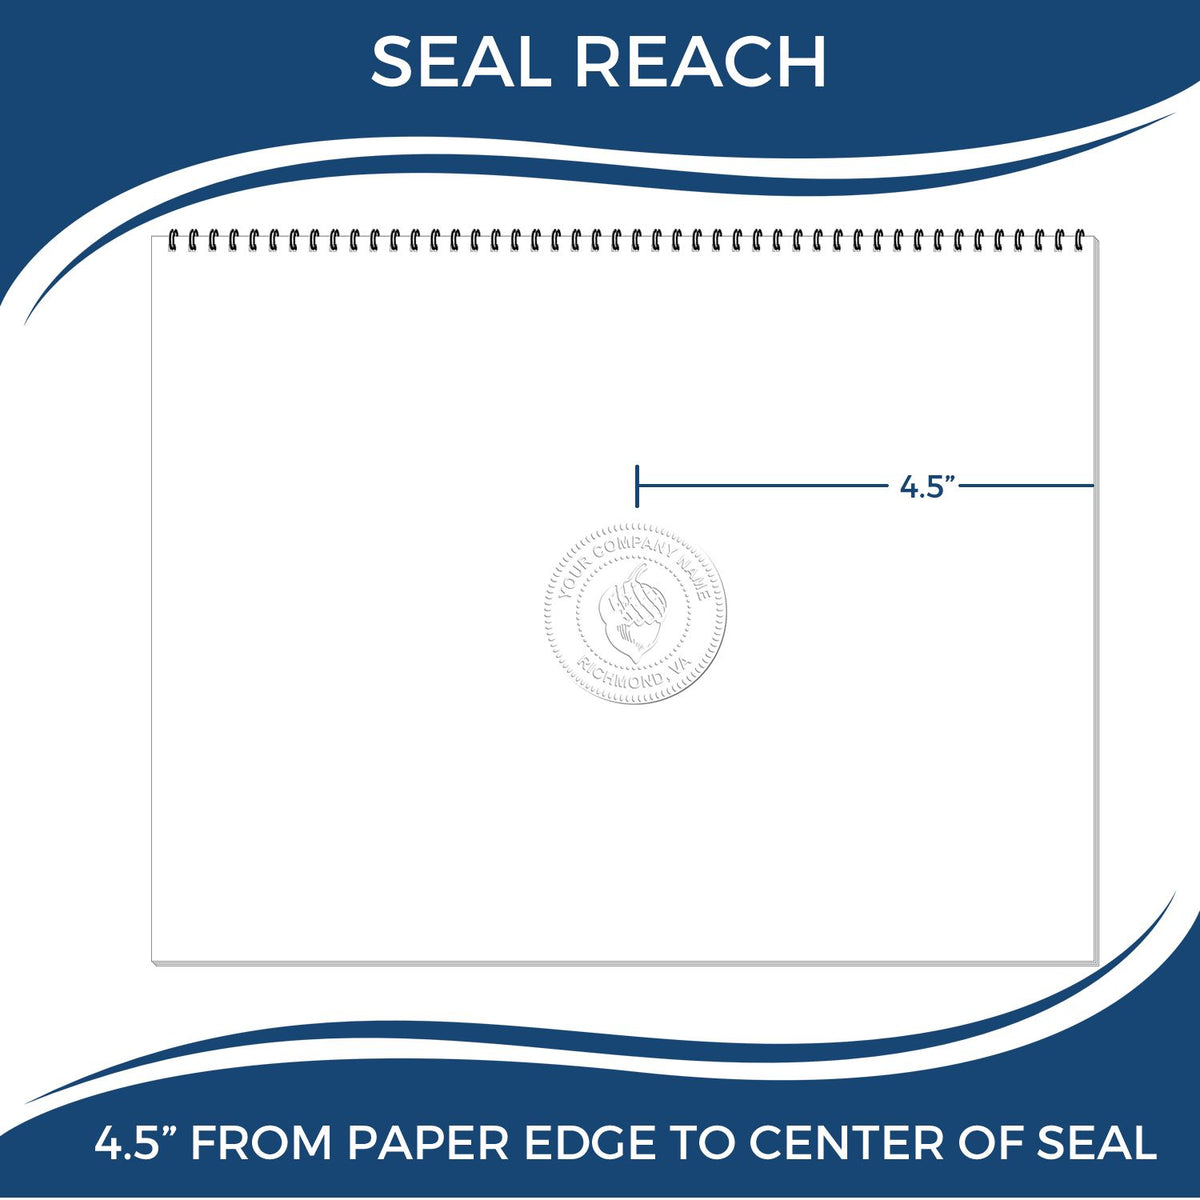 An infographic showing the seal reach which is represented by a ruler and a miniature seal image of the State of Florida Extended Long Reach Engineer Seal